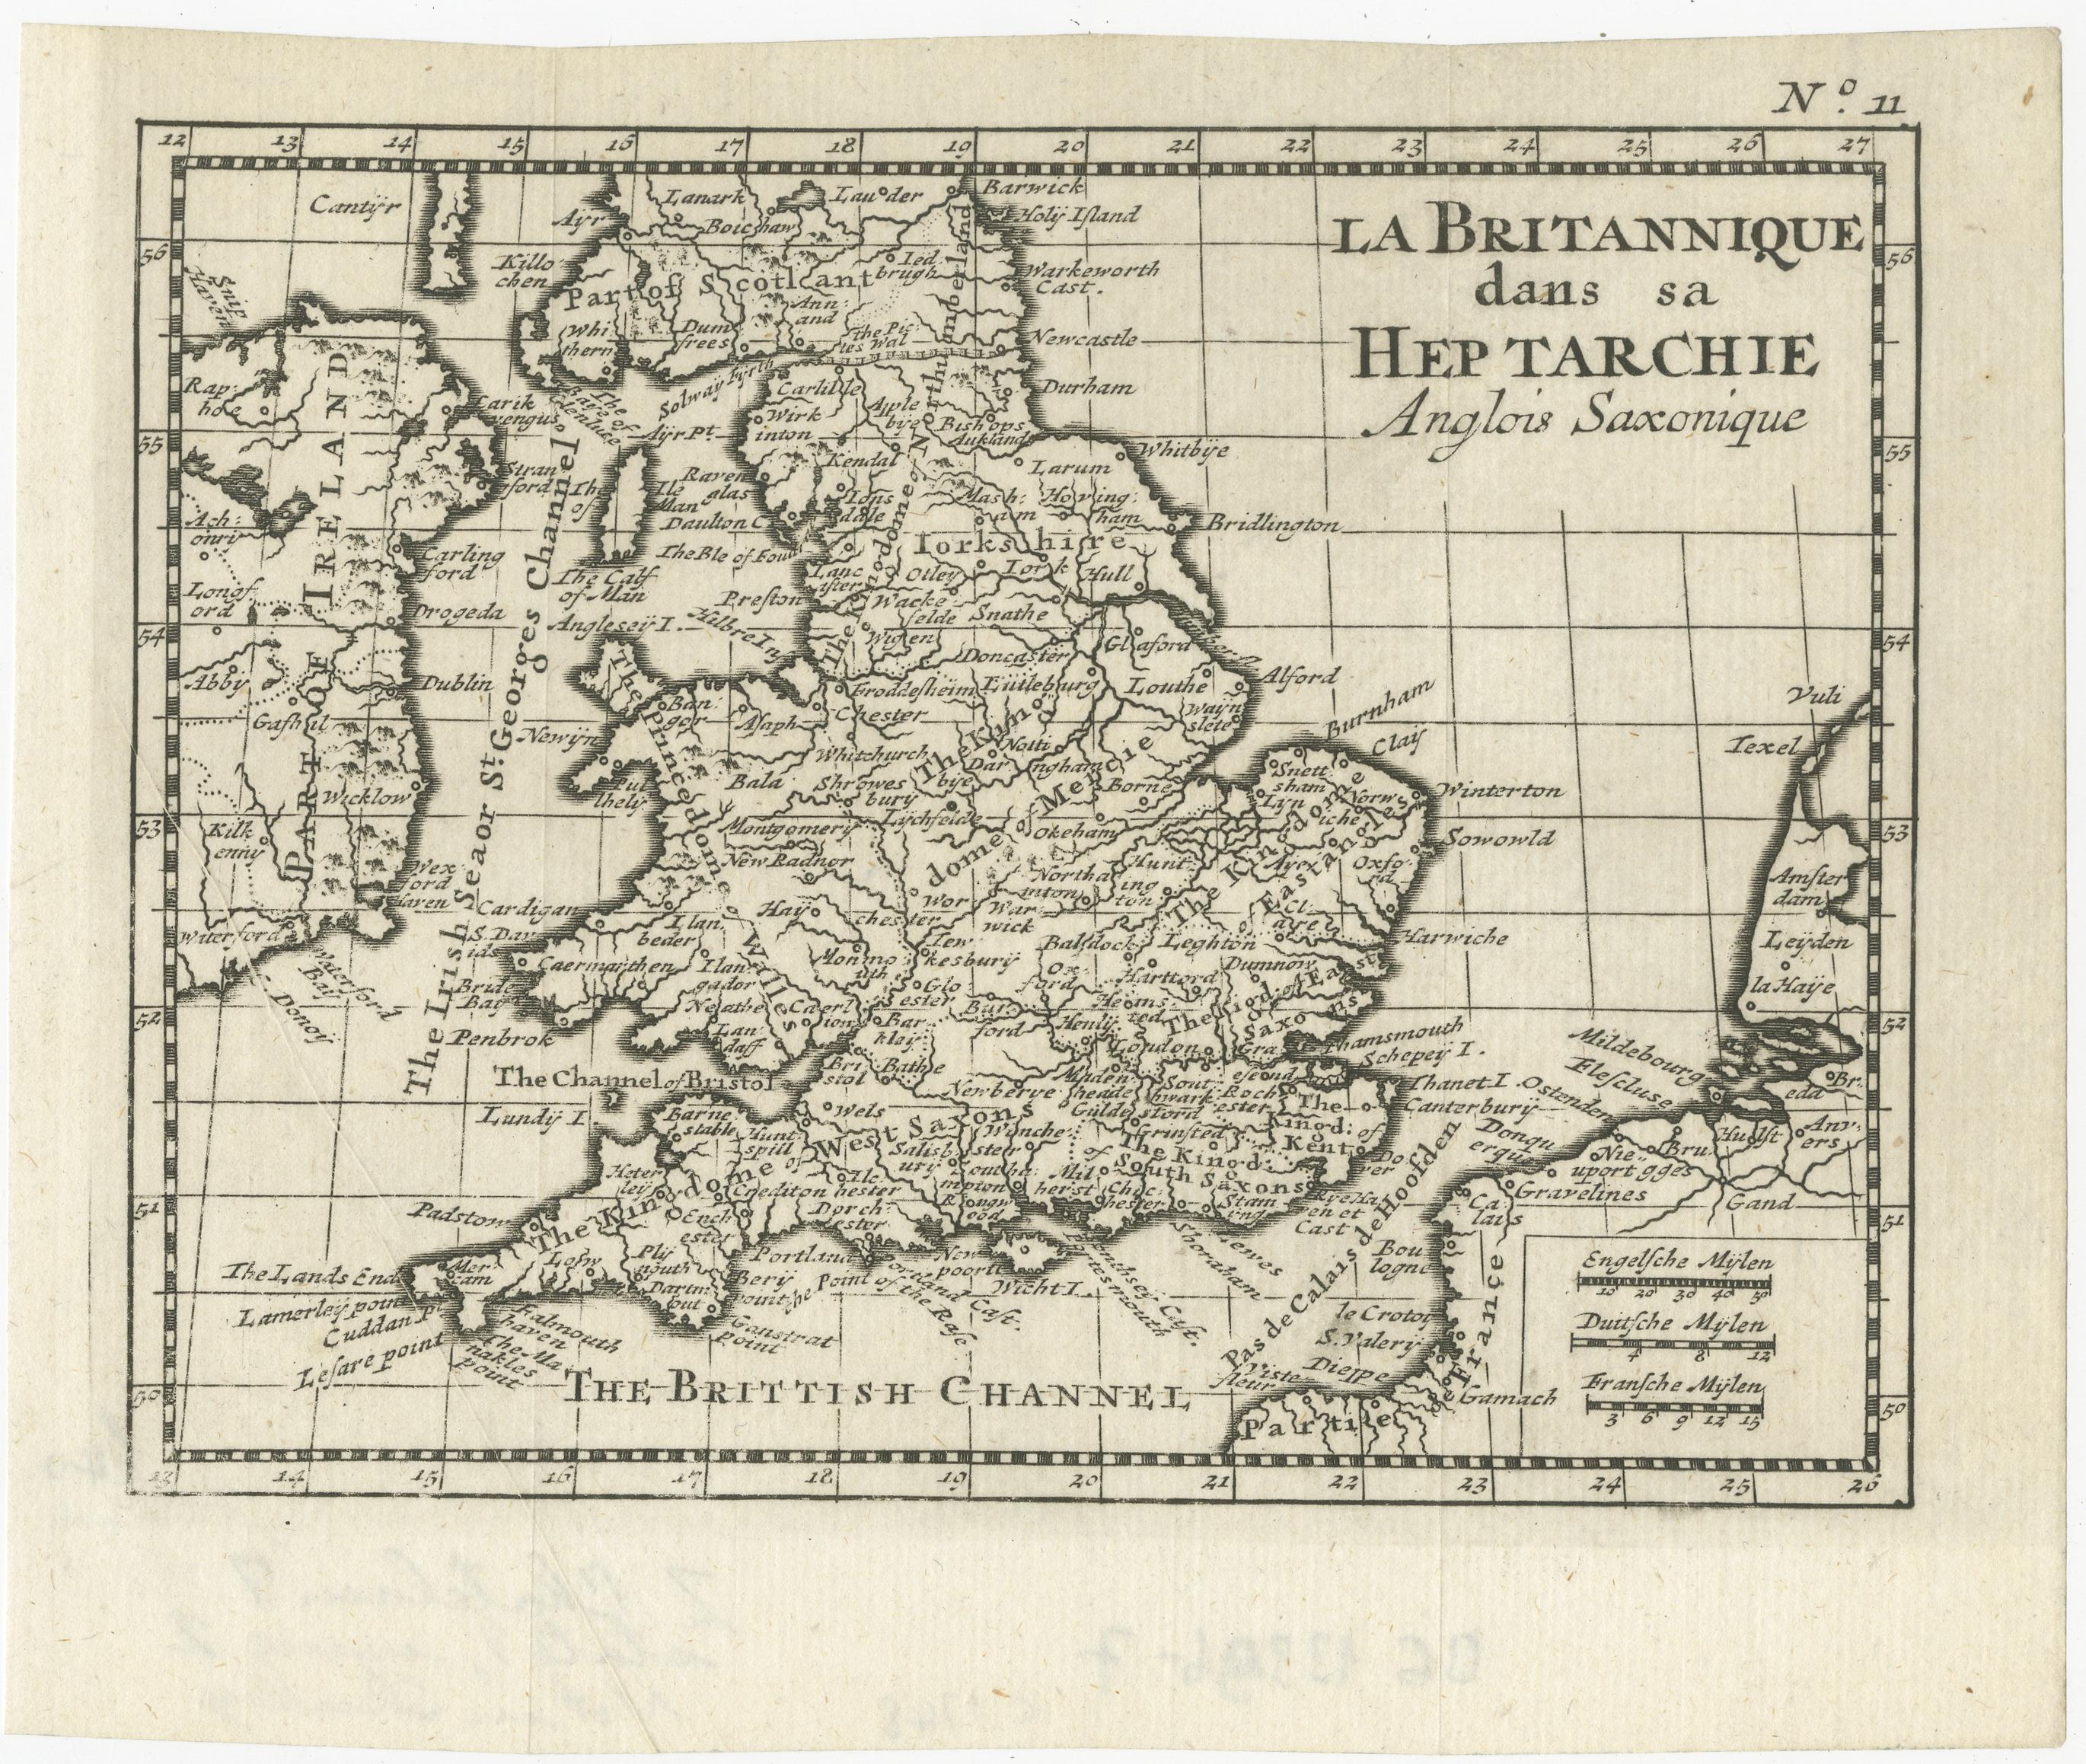 Antique map titled 'La Britannique dans sa Heptarchie Anglois Saxonique'. This little map shows England and Wales as it was during the Heptarchy, a phrase referring to the seven kingdoms that arose after the departure of the Romans, from 500-850 AD.